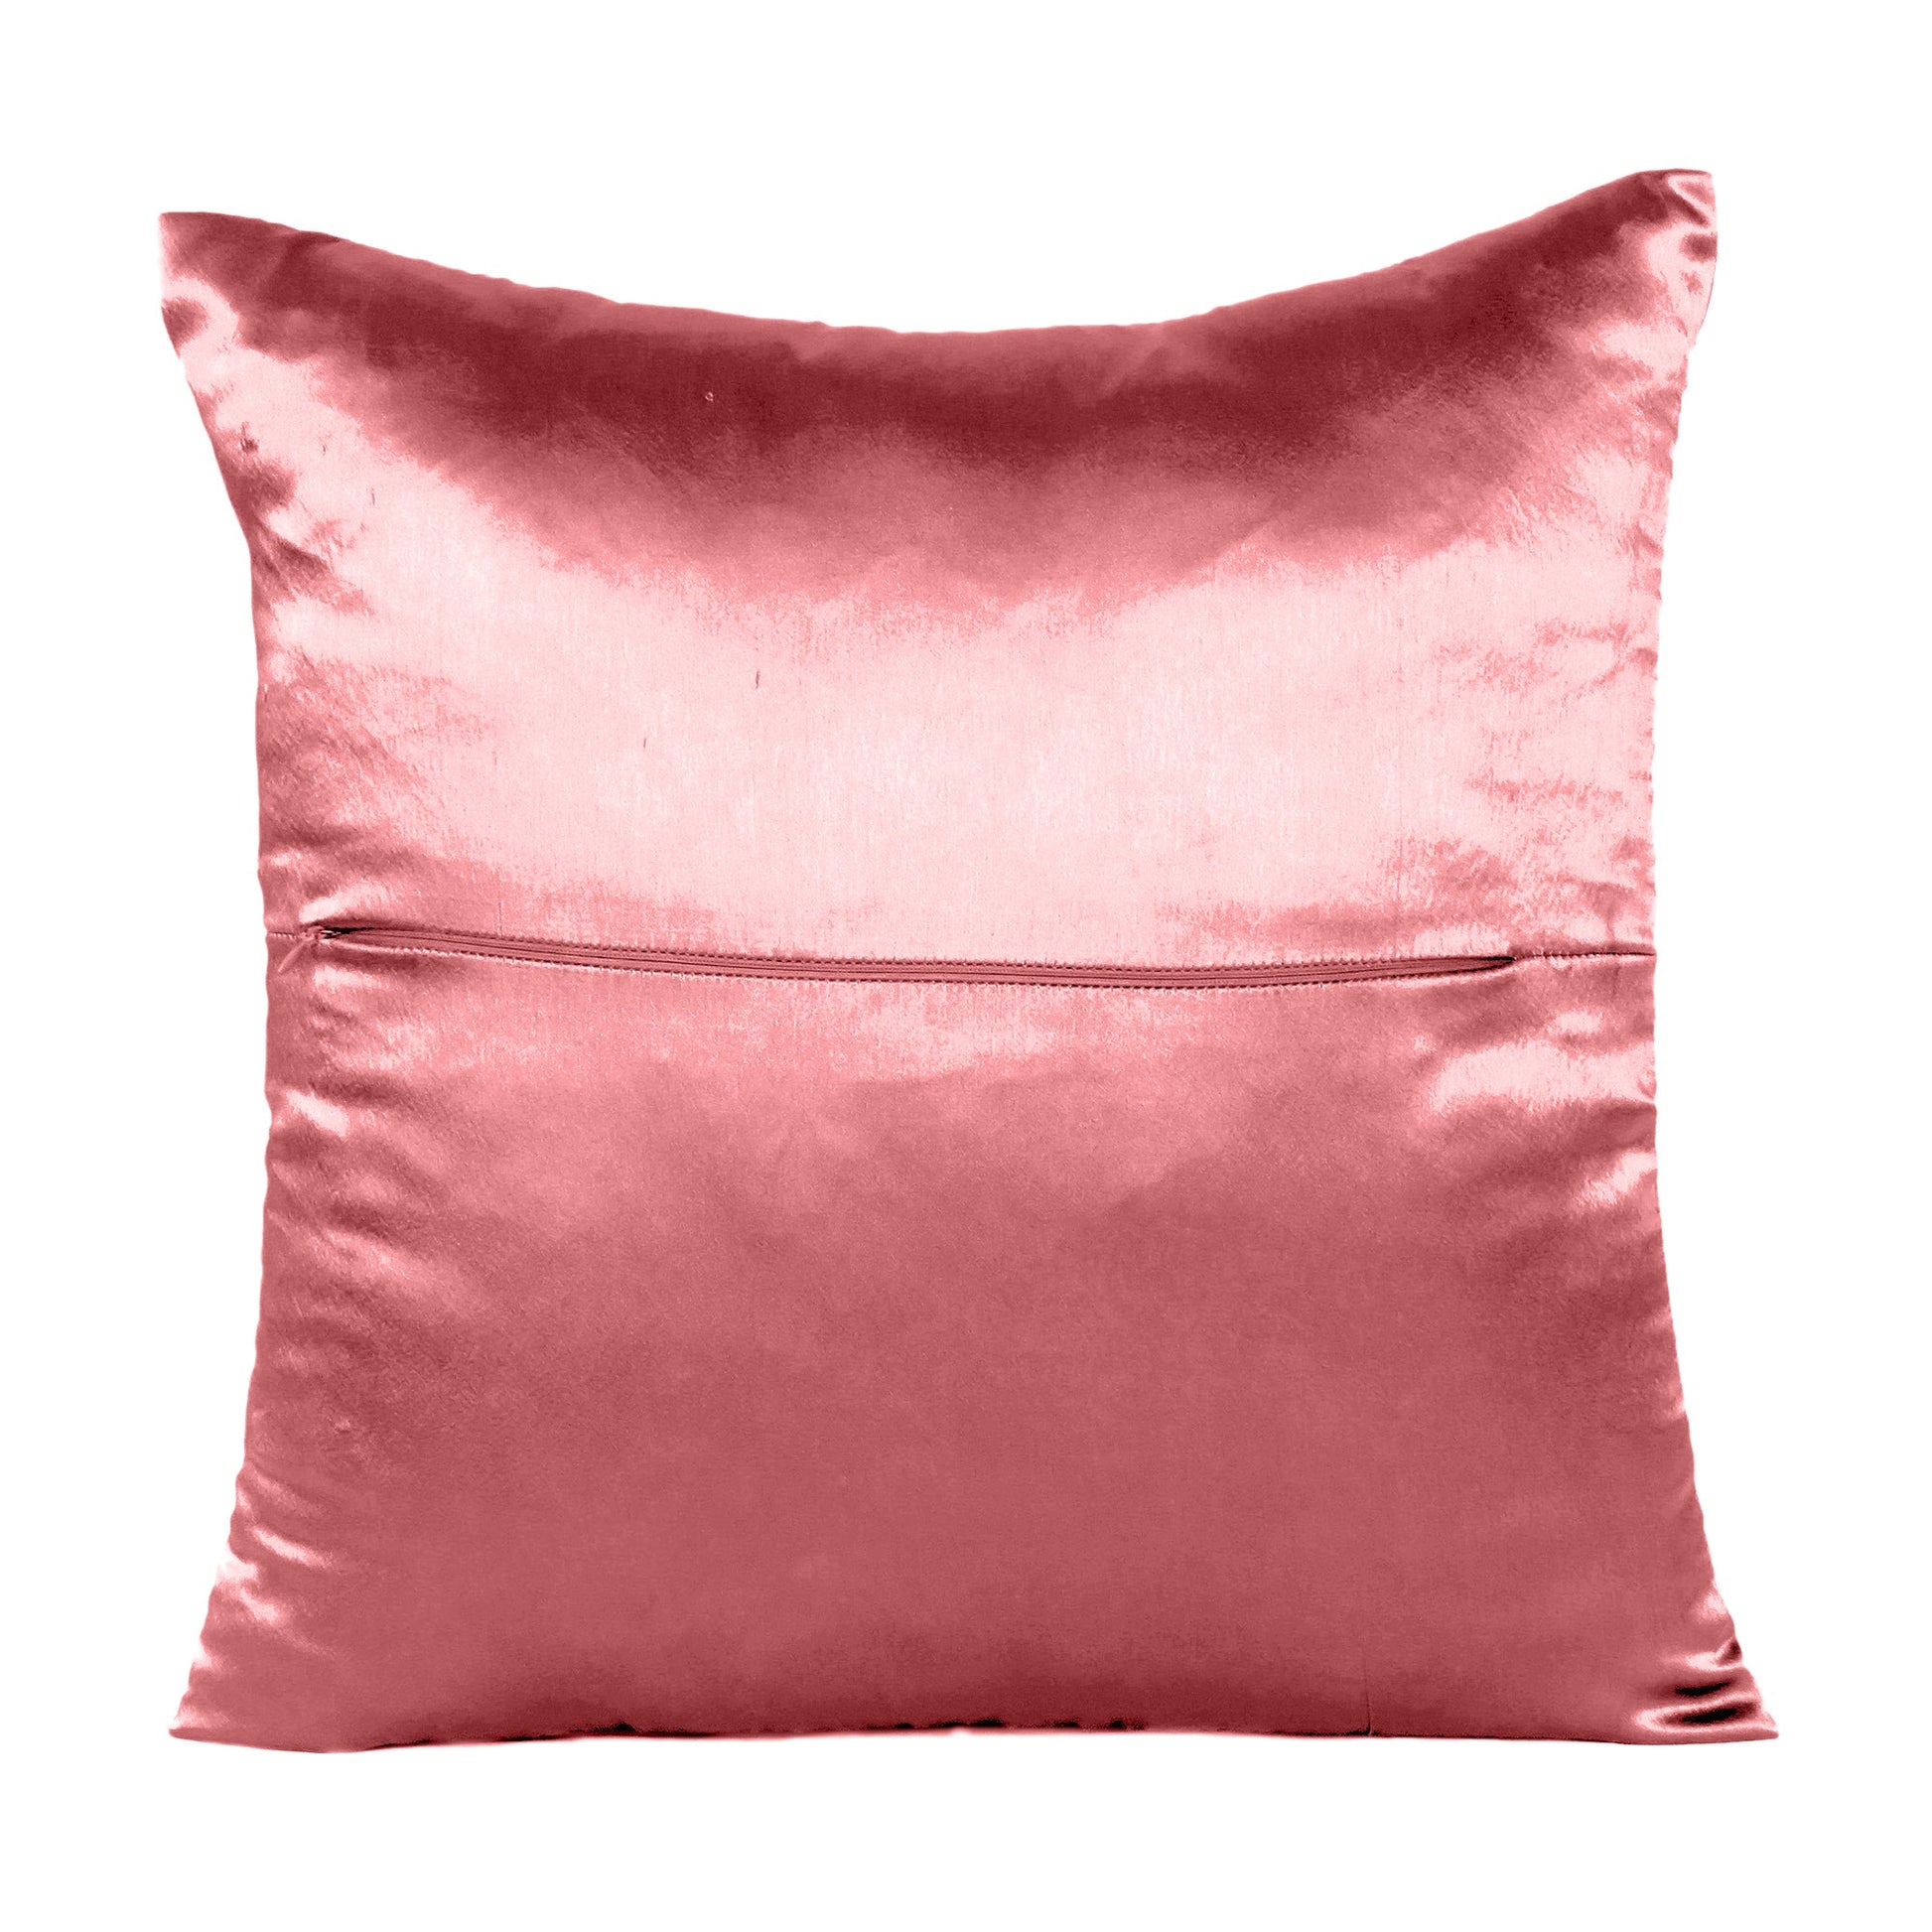 Luxury Soft Plain Satin Silk Cushion Cover in Set of 2 - Sugal Coral